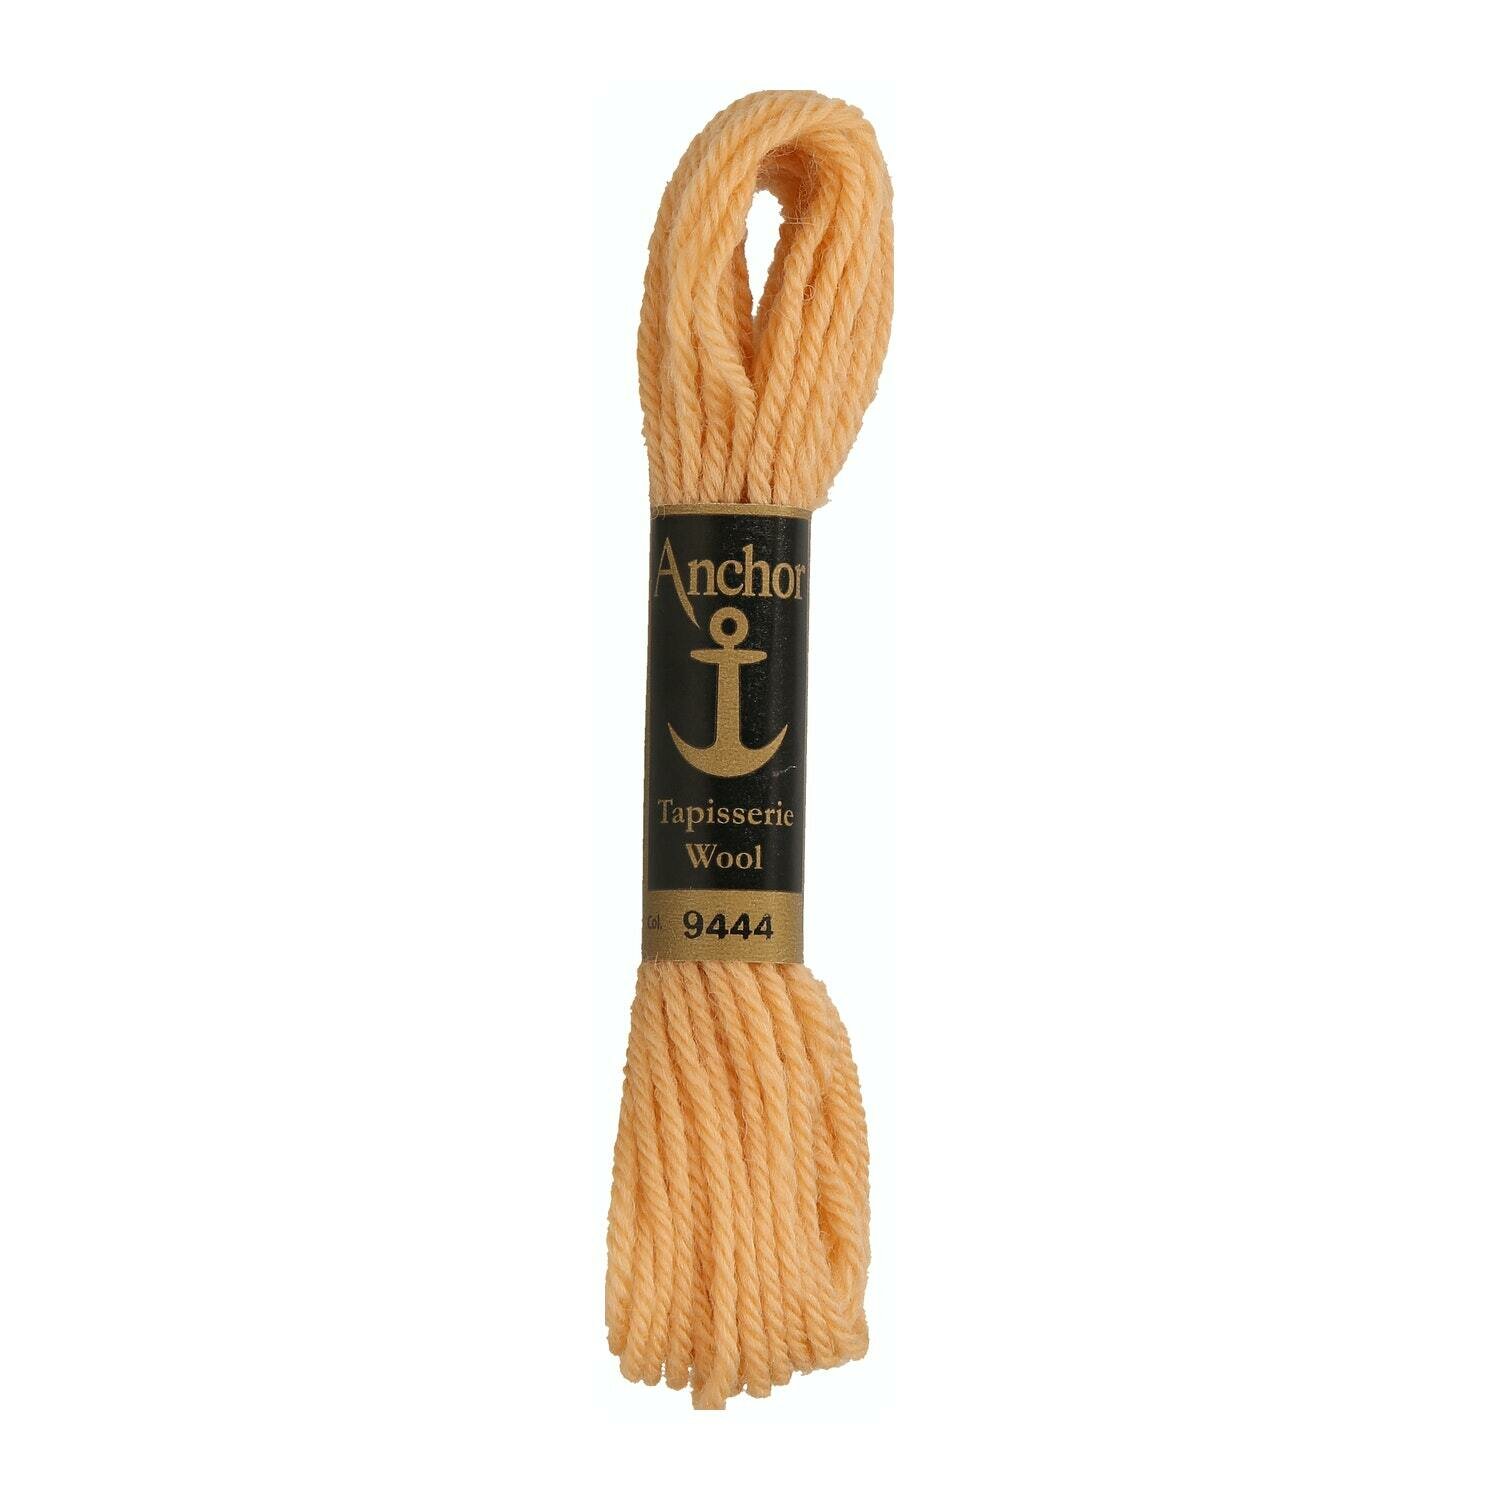 Anchor Tapisserie Wool #  09444